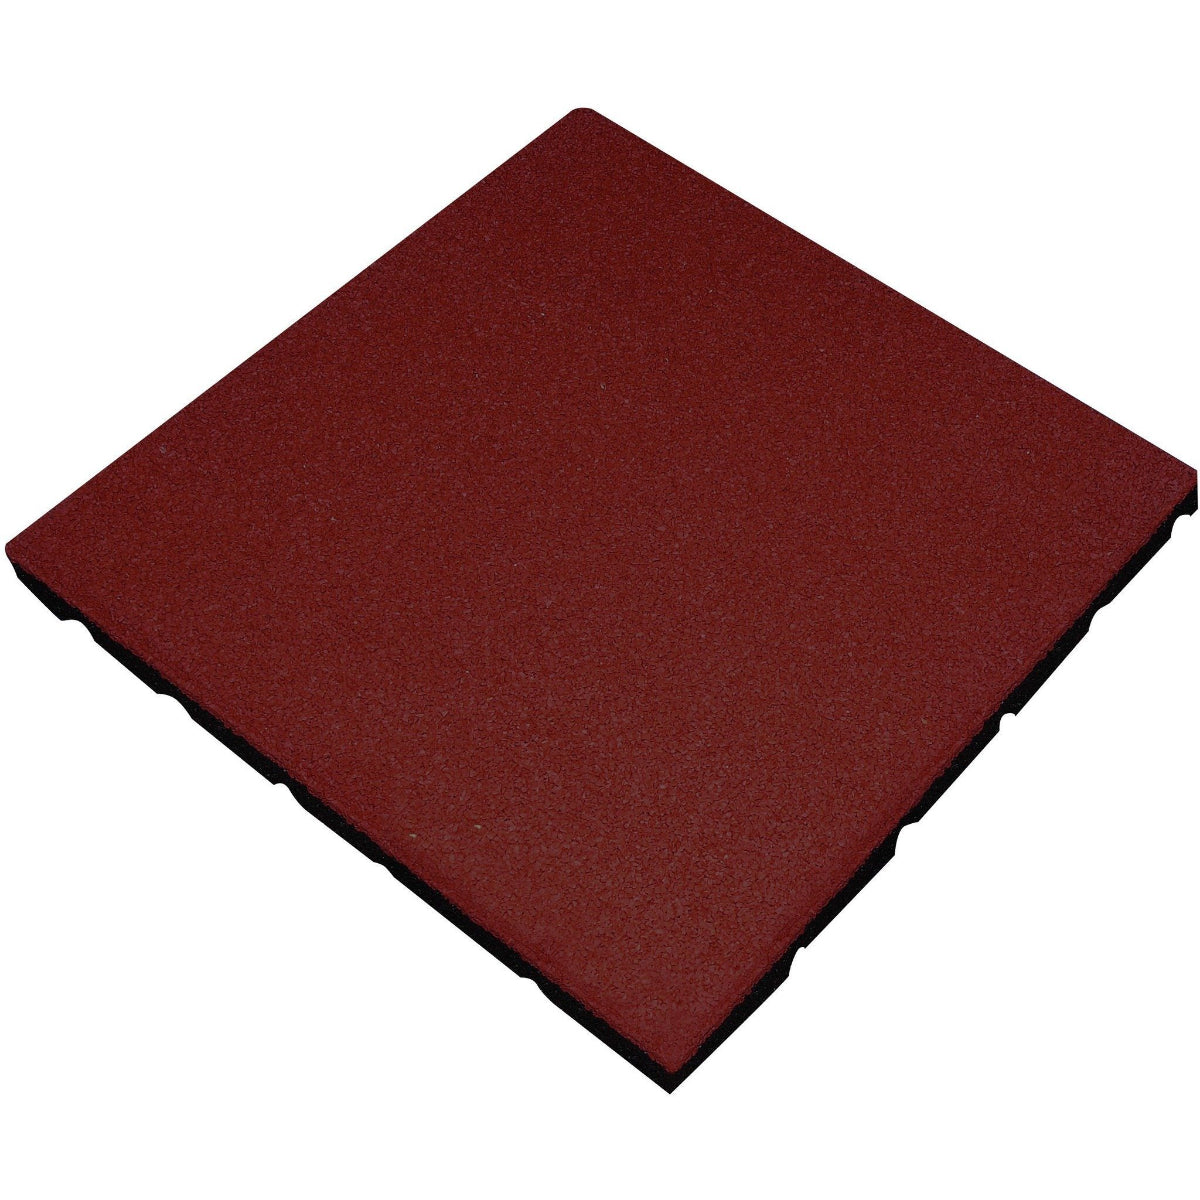 Cannons UK 50cm x 50cm x 20mm Rubber Playground Tiles from £23.96 m2 - Cannons UK